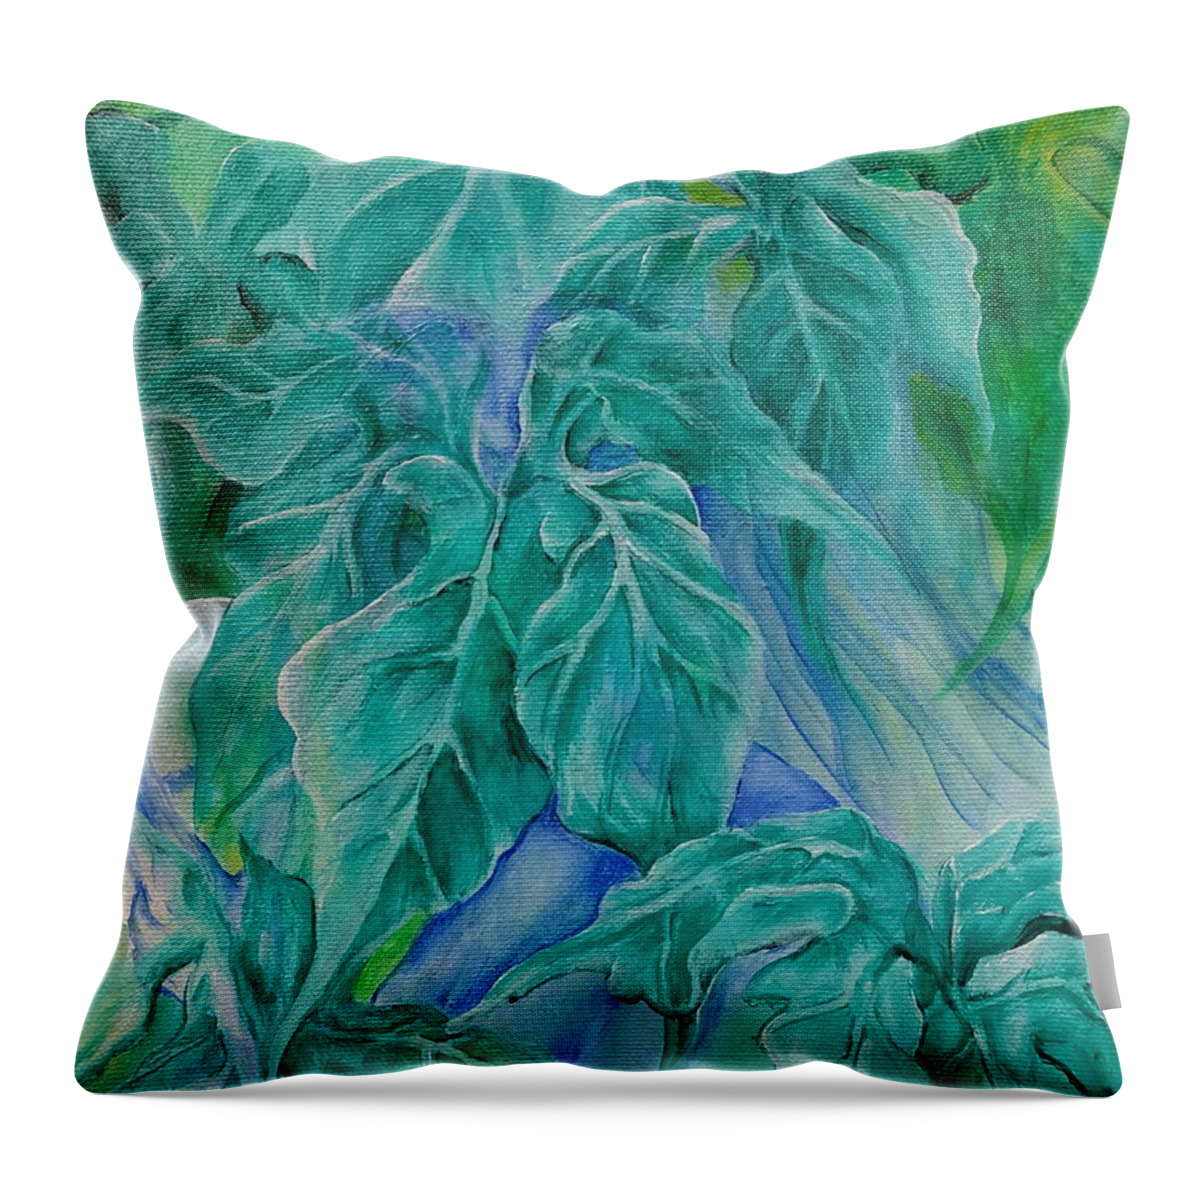 Leaves Throw Pillow featuring the painting Peering Leaves by Teresamarie Yawn